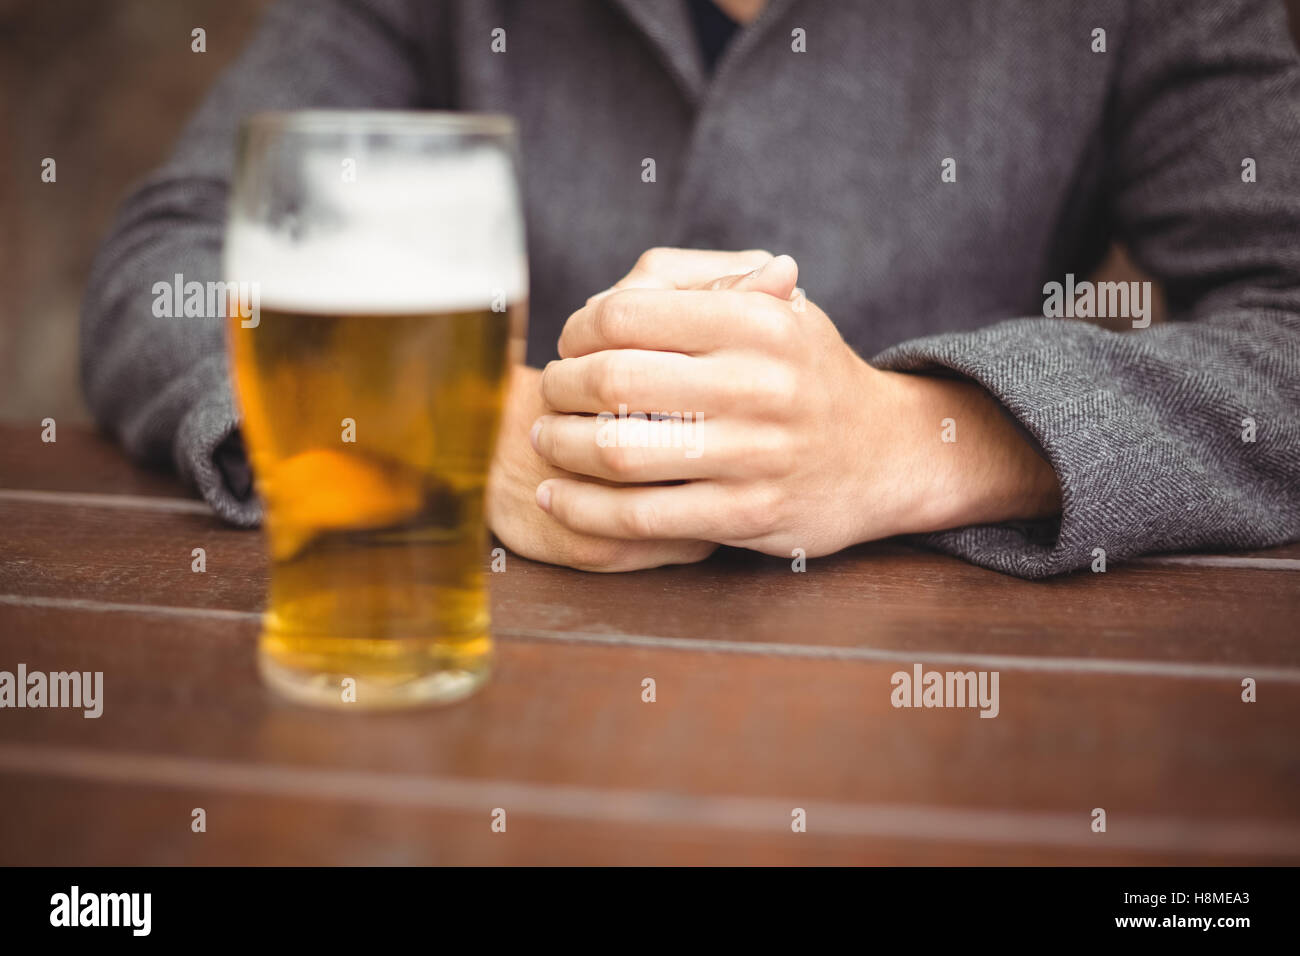 Man sitting in bar with glass of beer on table Stock Photo